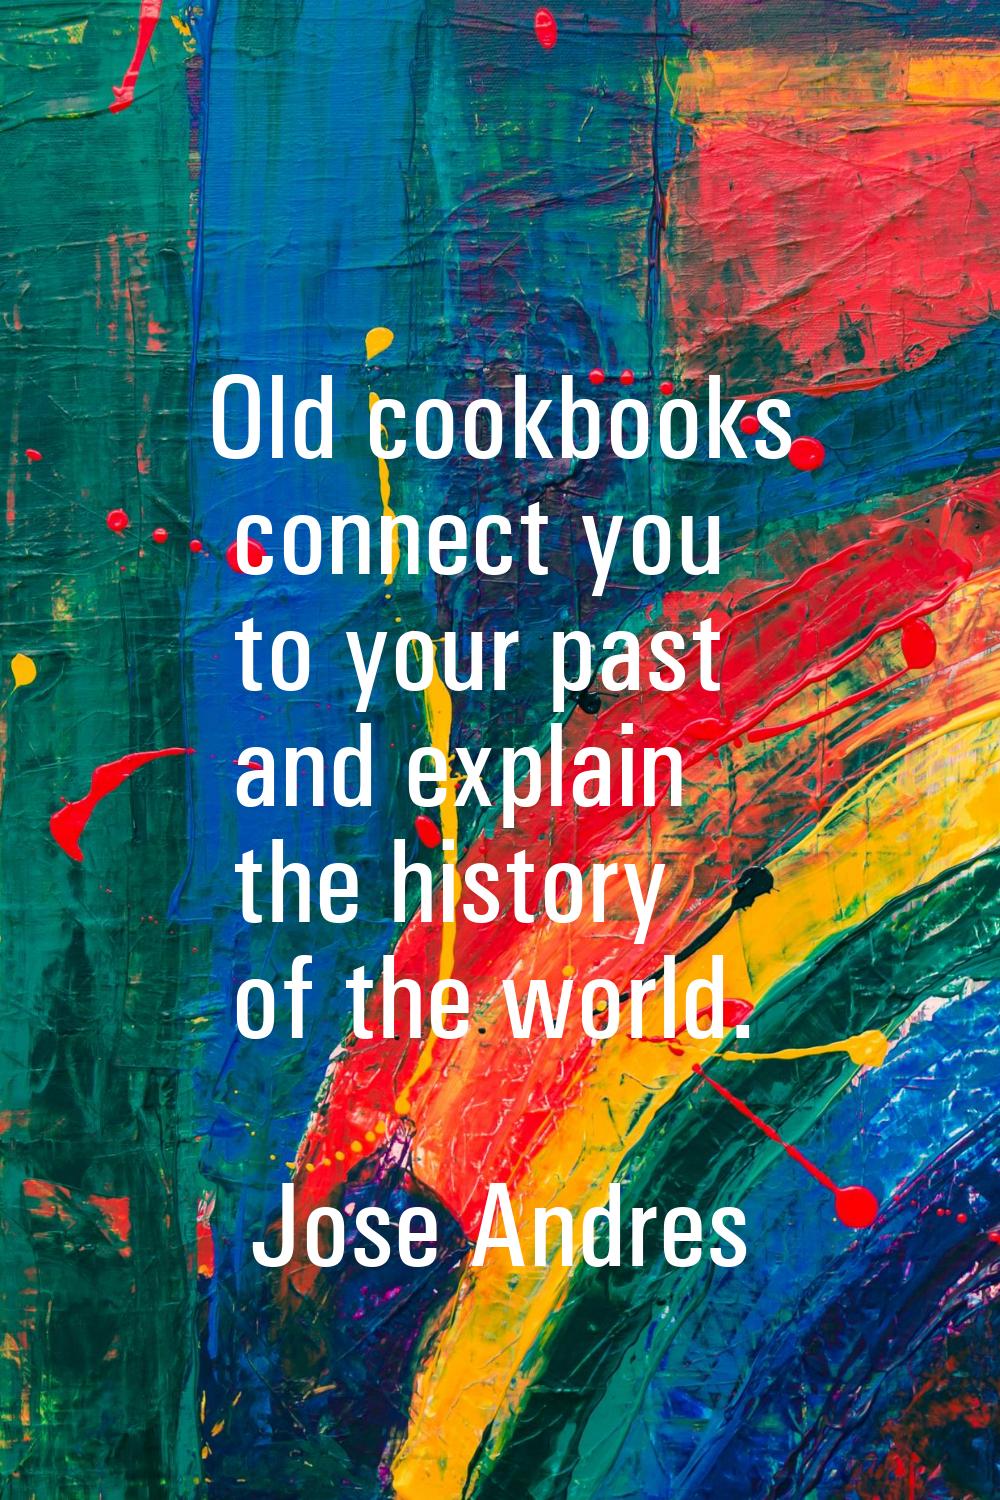 Old cookbooks connect you to your past and explain the history of the world.